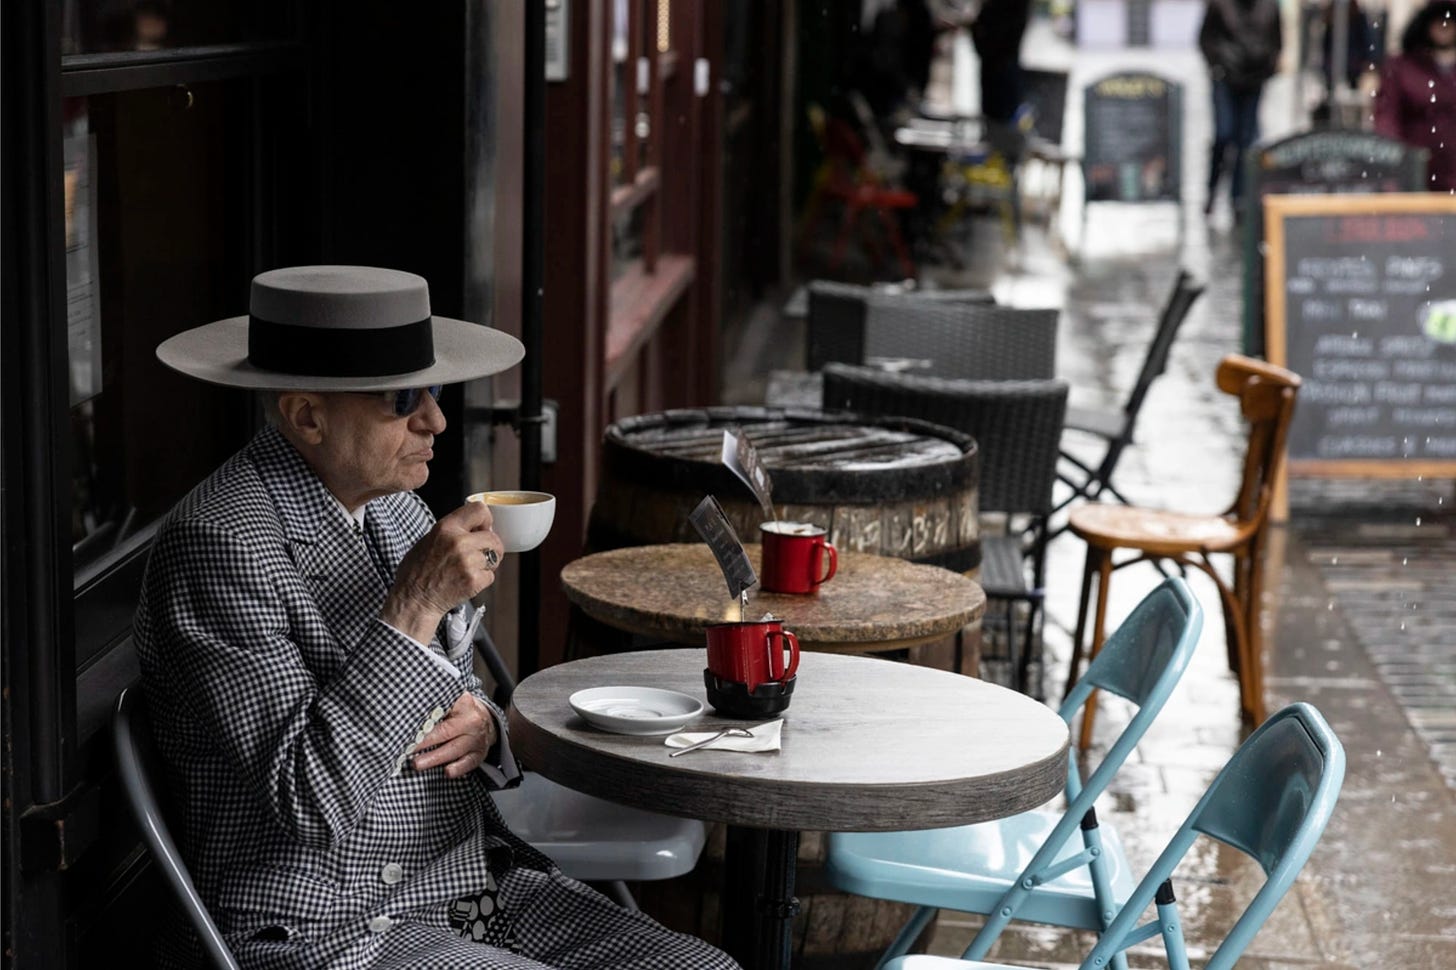 An older gentleman in a stylish suit and broad brimmed hat sipping a latte alone at an ourdoor cafe table under an awning in the London rain, looking pretty grumpy, to be honest.